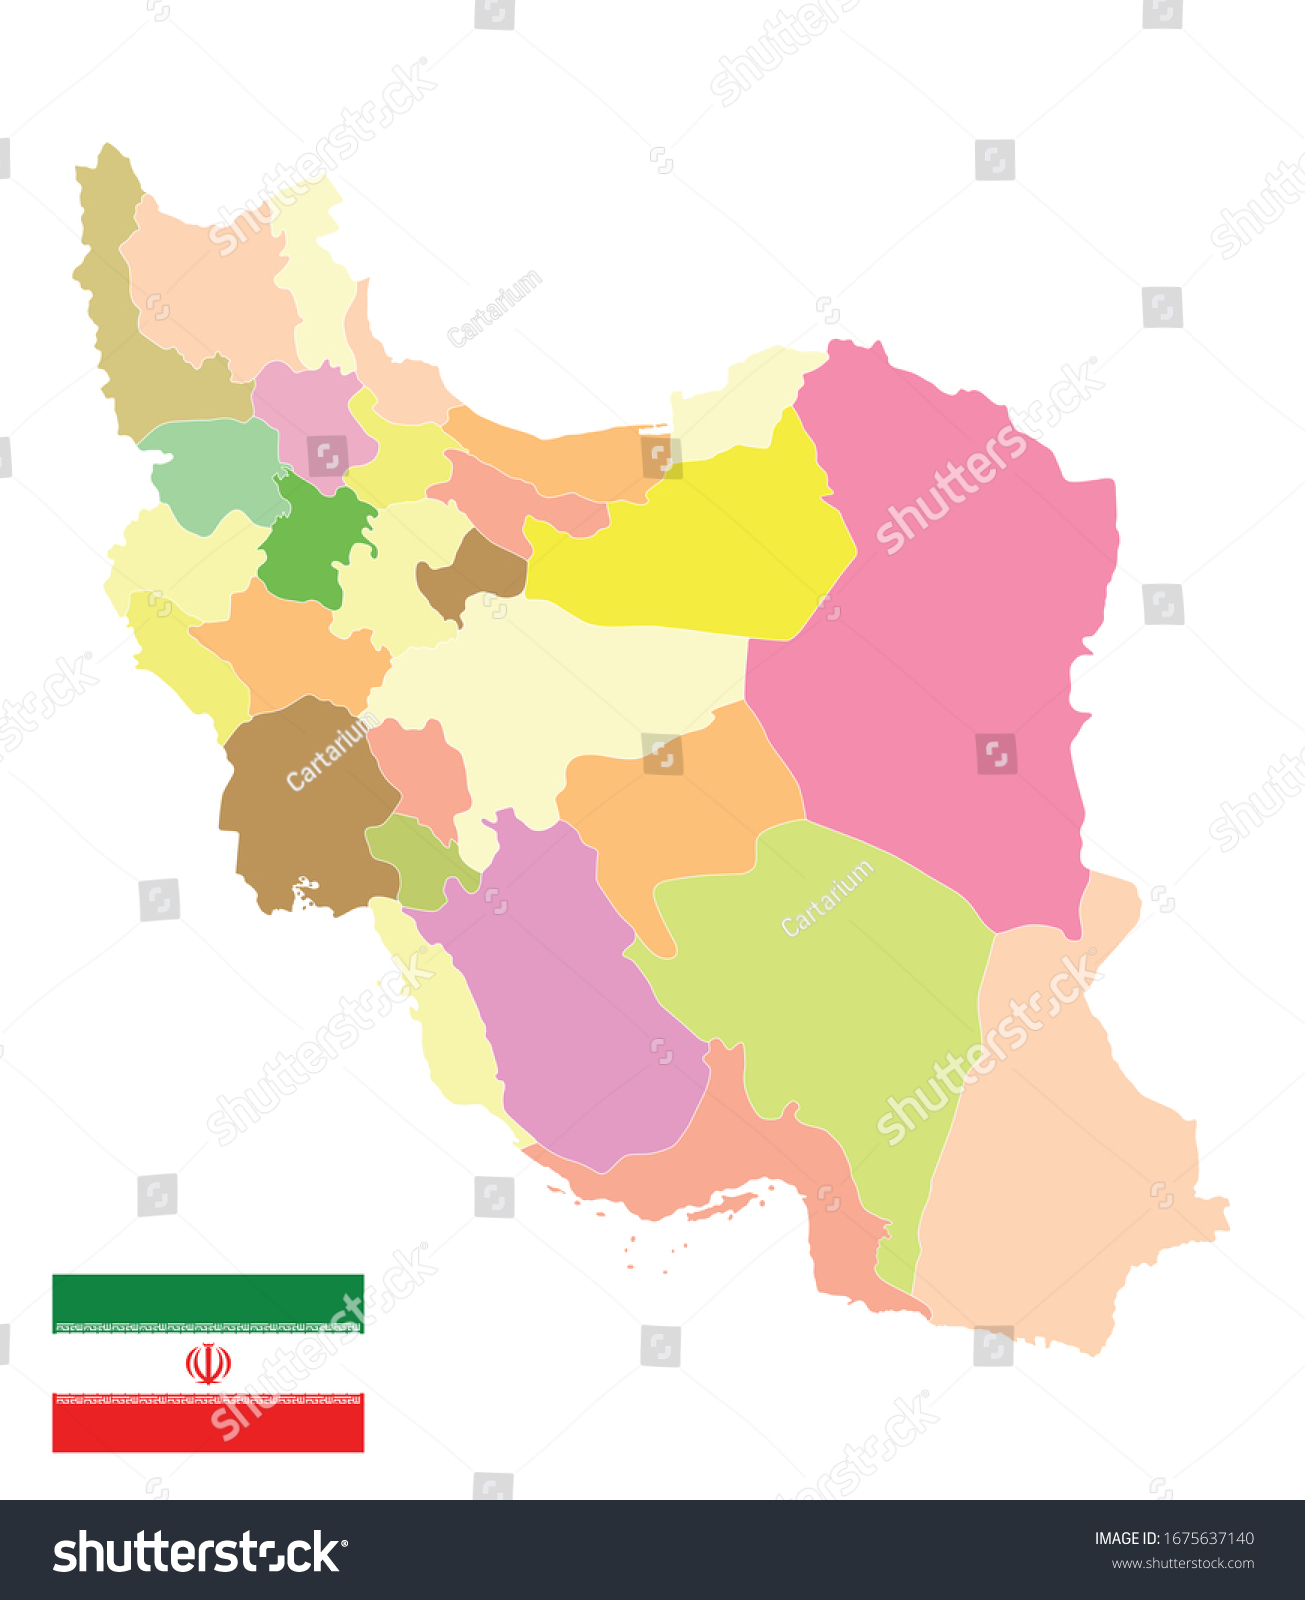 Administrative Political Map Of Iran Isolated On Whit - vrogue.co